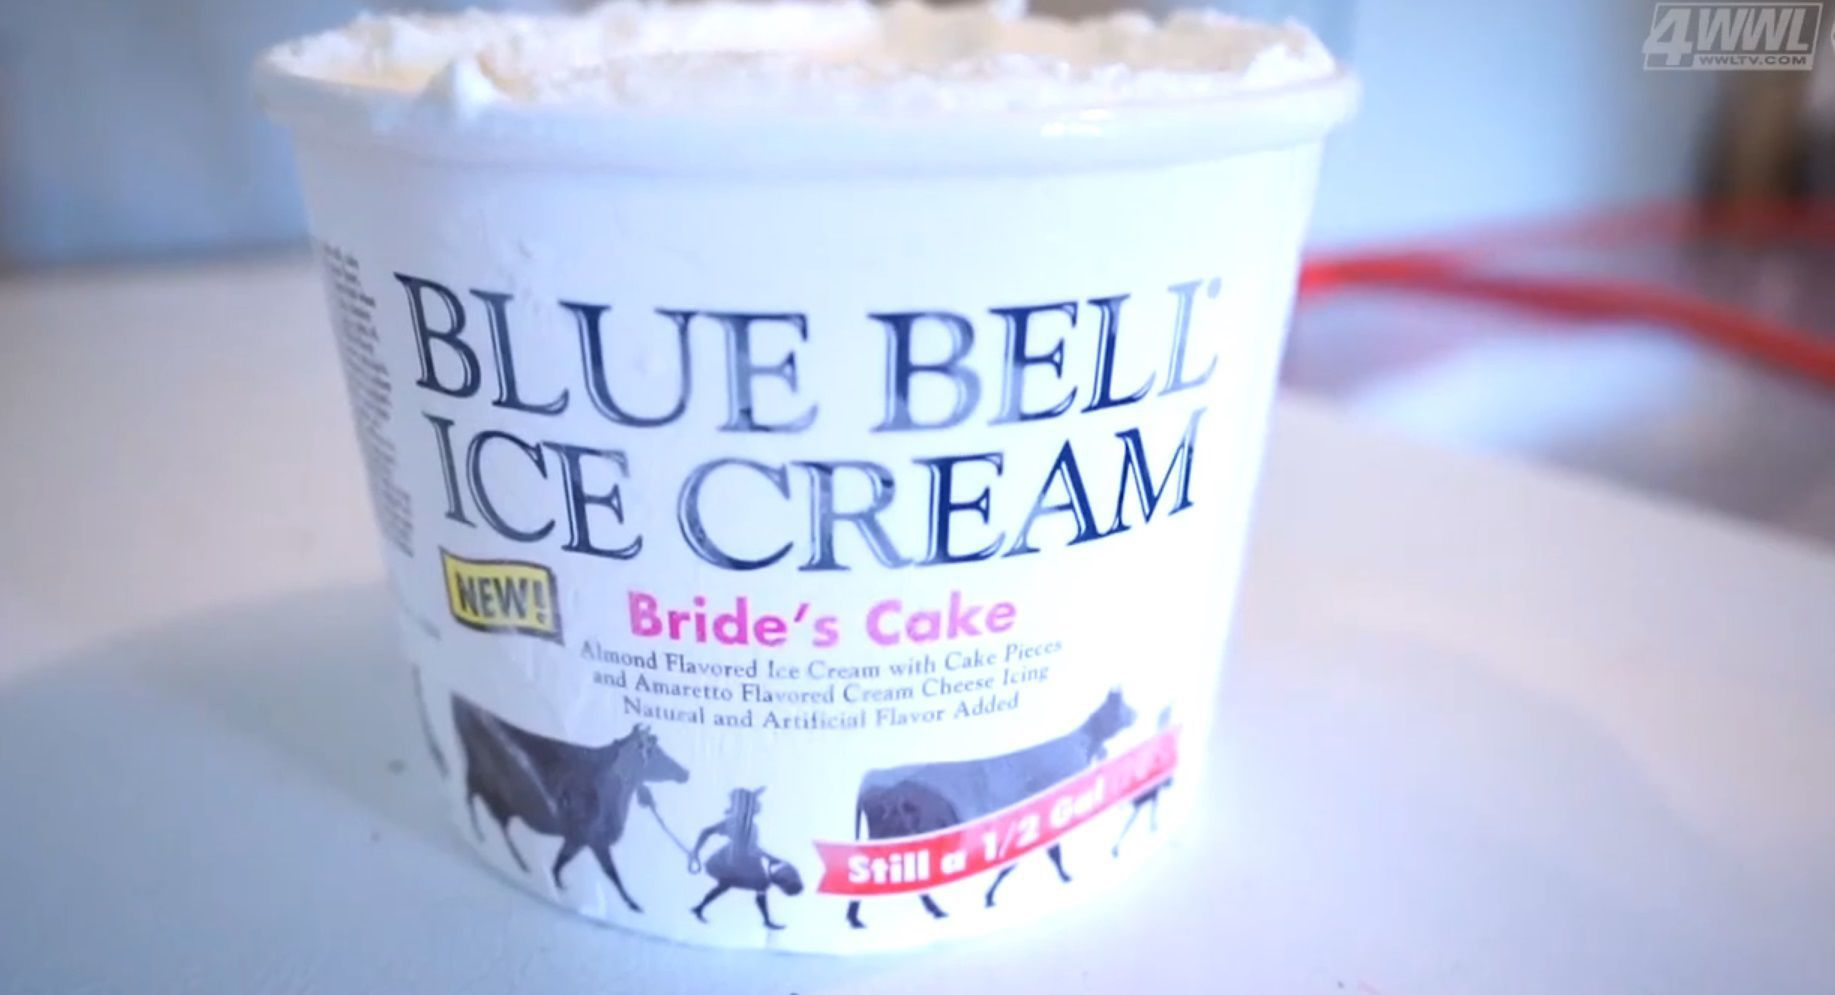 Blue Bell Ice Cream: Flavors and Prices